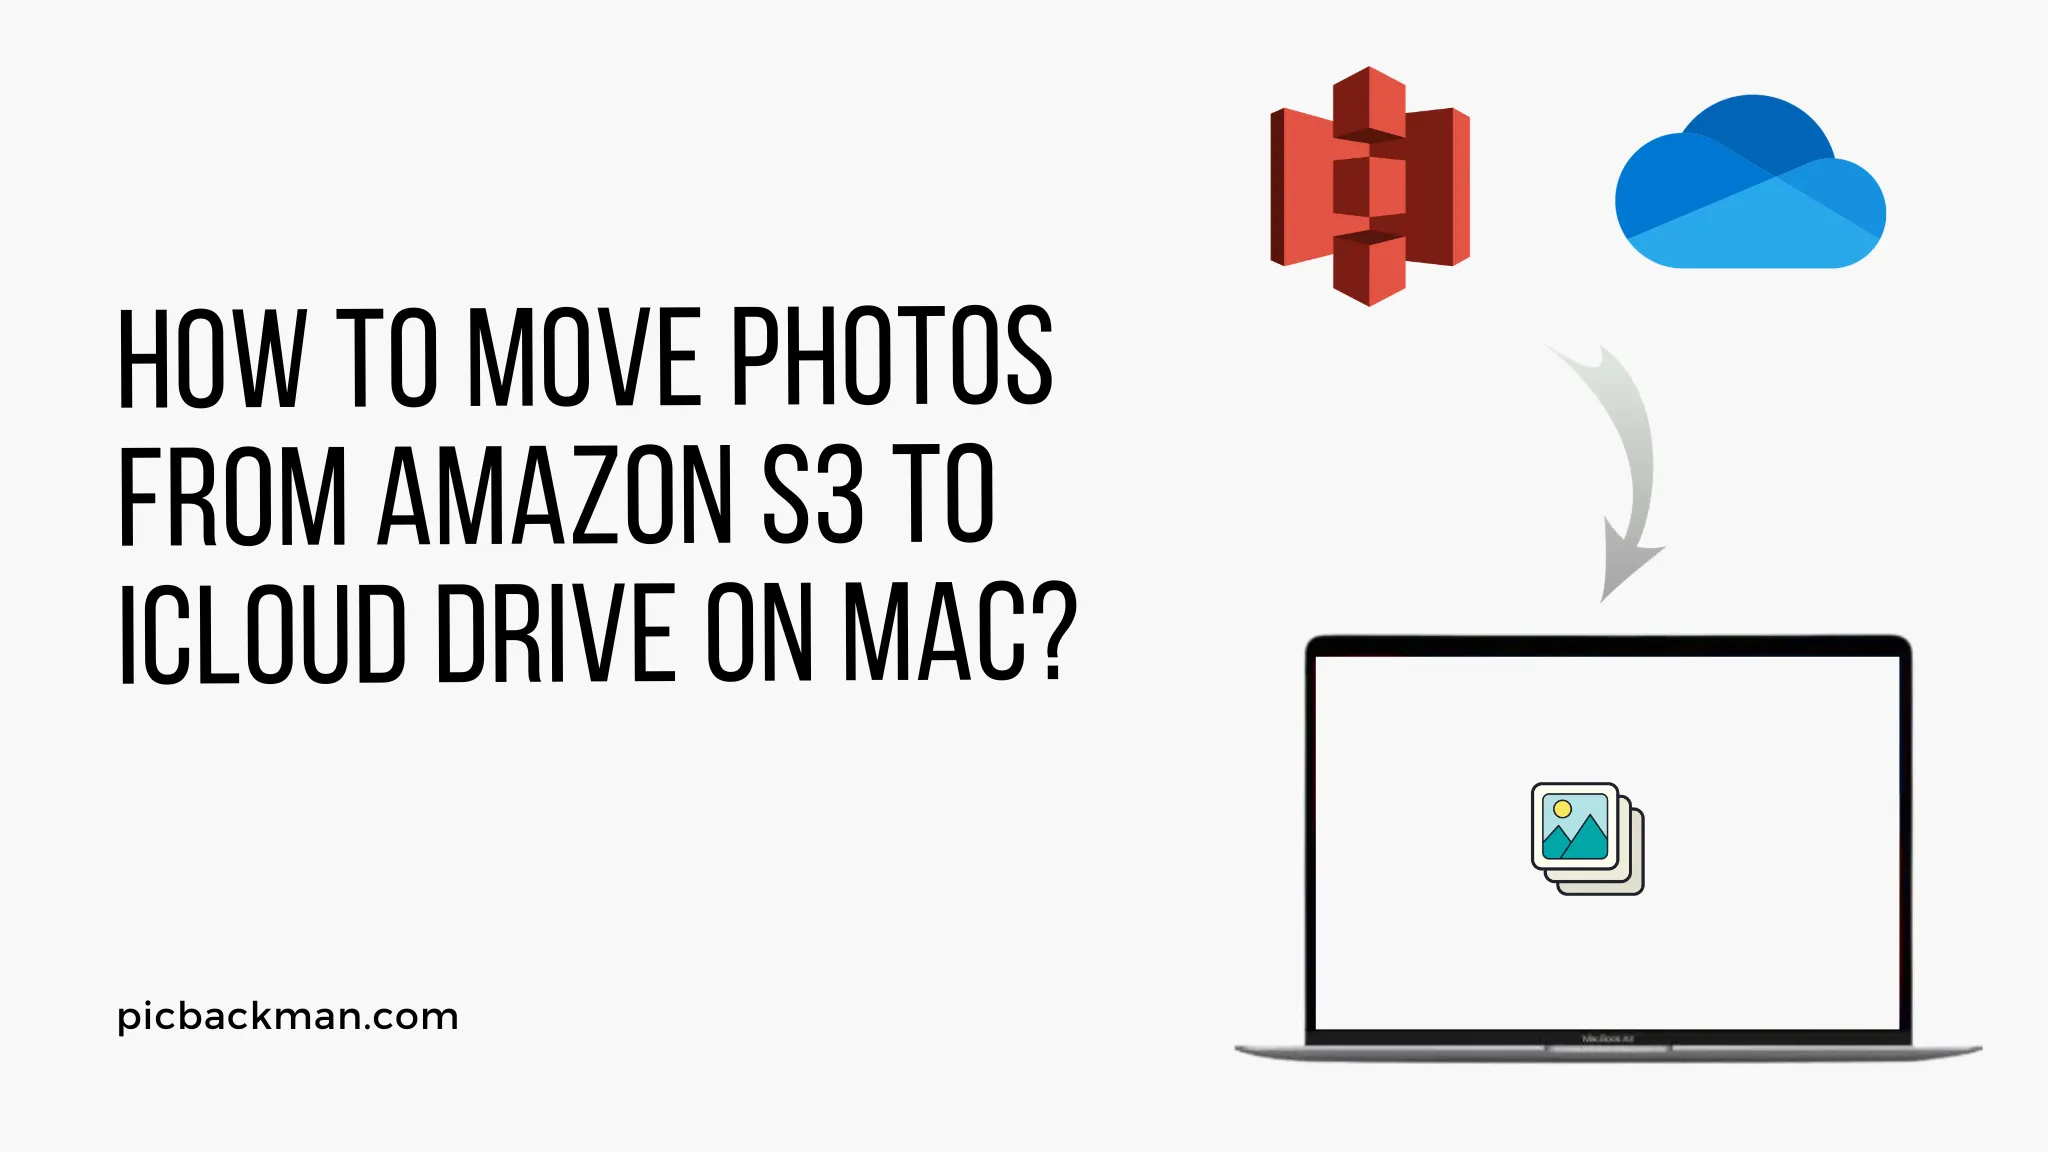 How to Move Photos from Amazon S3 to iCloud Drive on Mac?